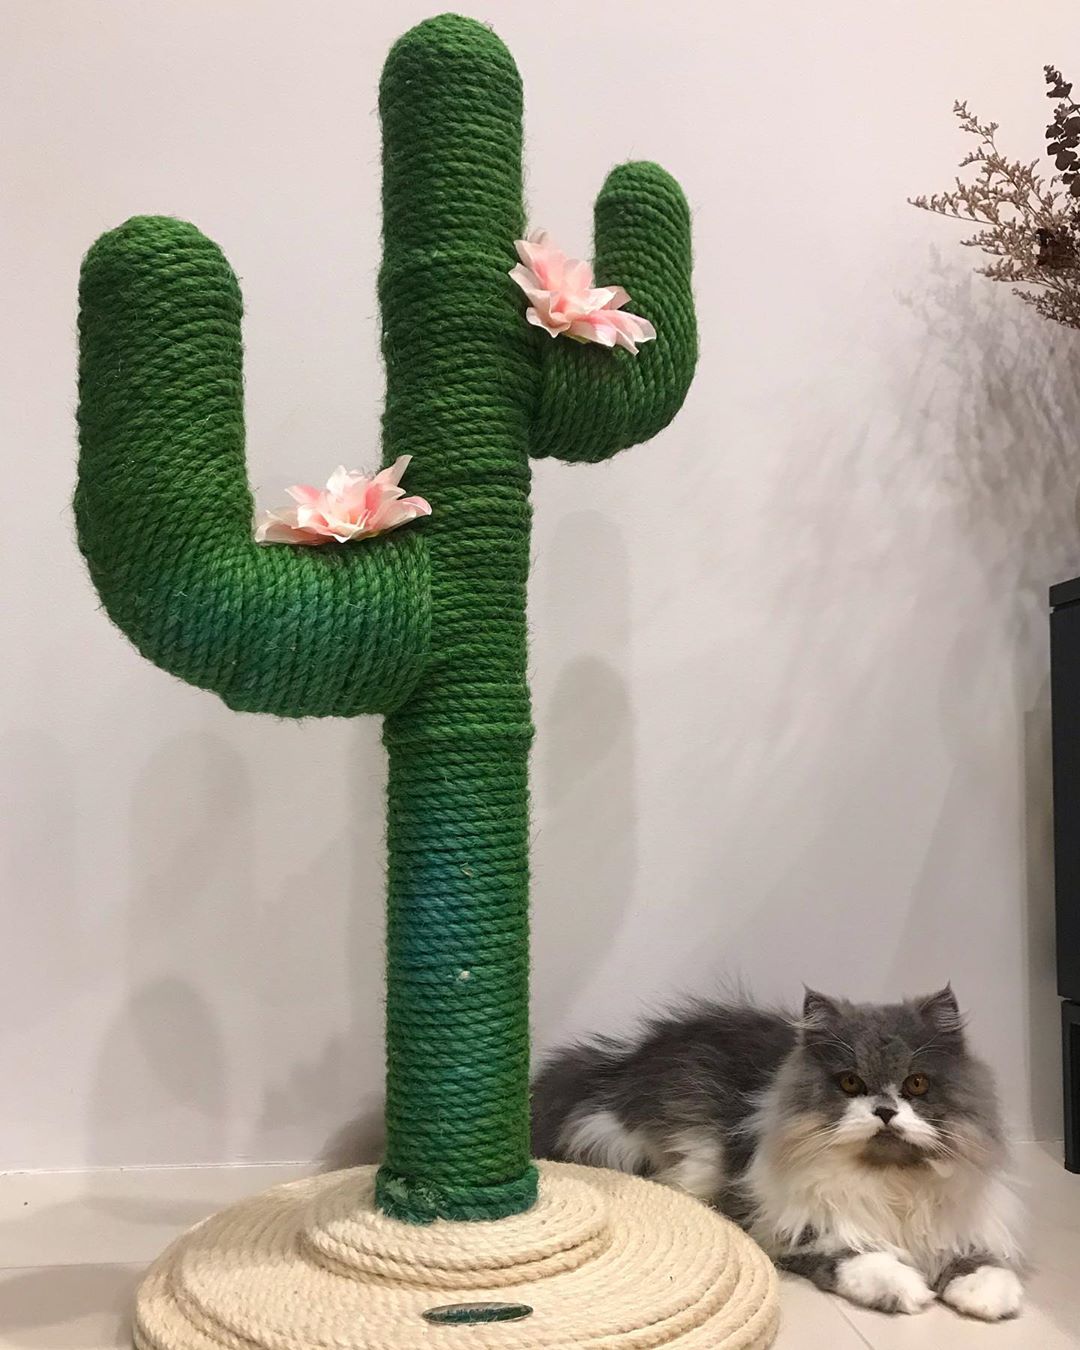 Cat sitting next to green cactus scratching post. Photo by Instagram user @maisythepersian